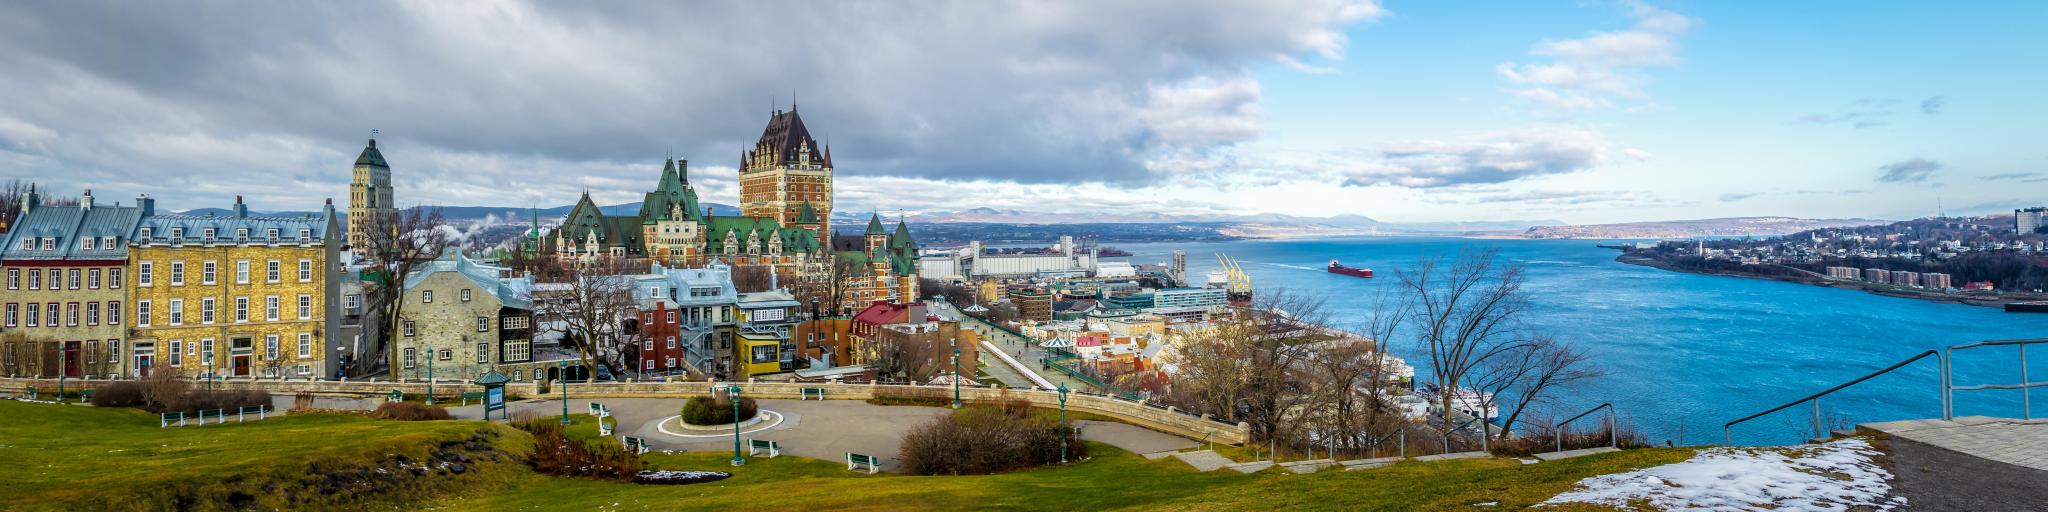 Quebec City, Quebec, Canada taken as a panoramic view of Quebec City skyline with Chateau Frontenac and Saint Lawrence river in winter.